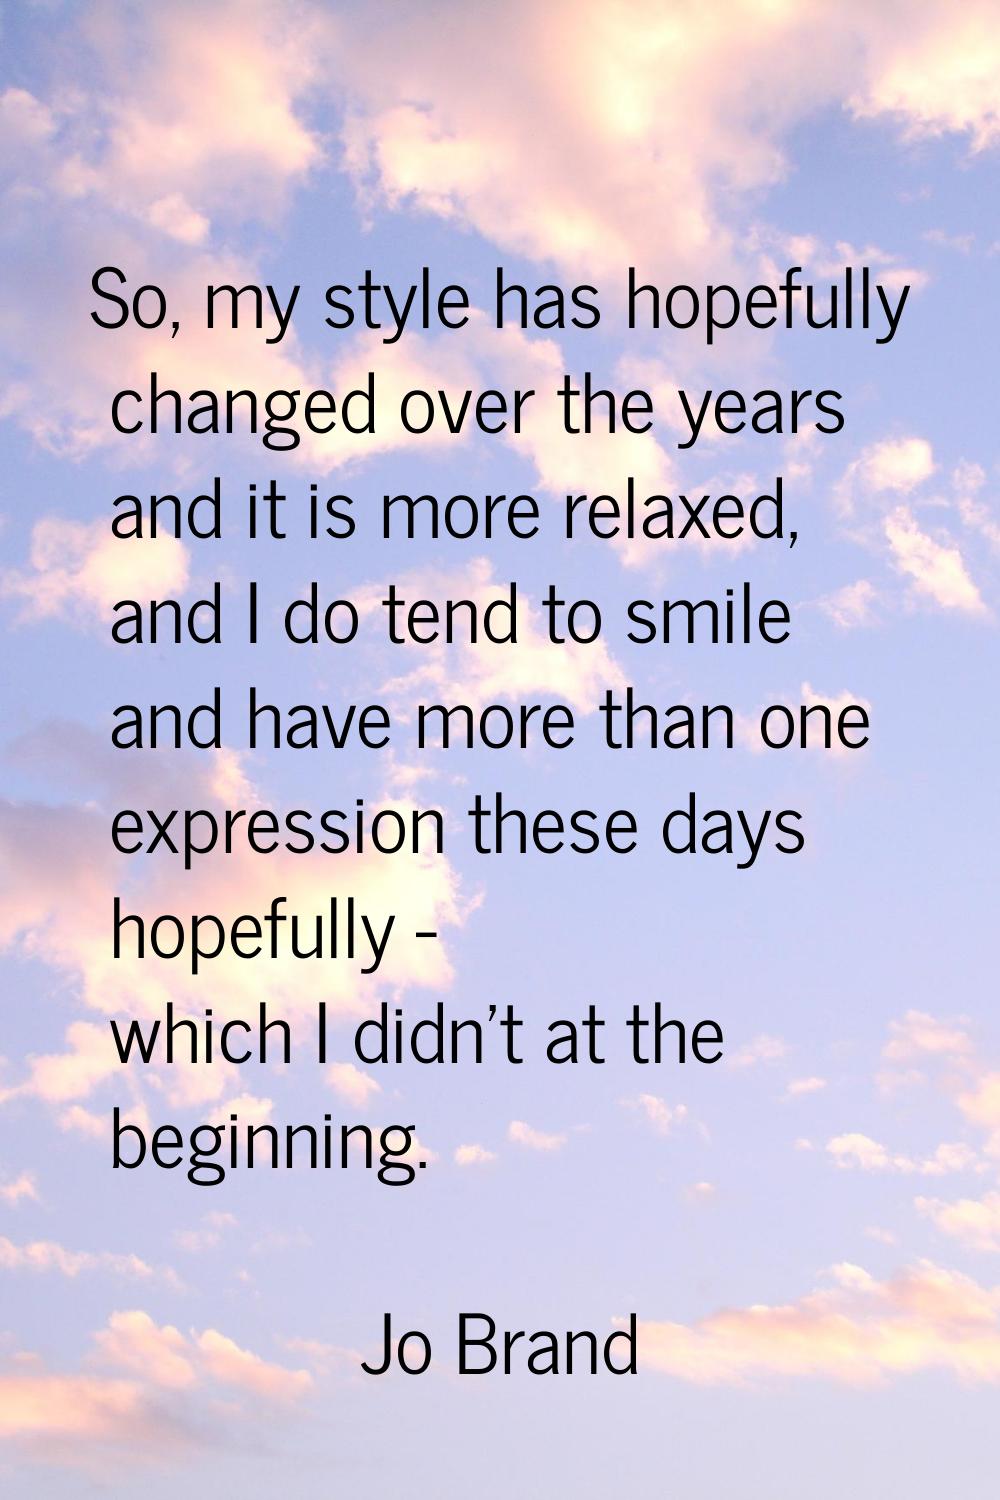 So, my style has hopefully changed over the years and it is more relaxed, and I do tend to smile an